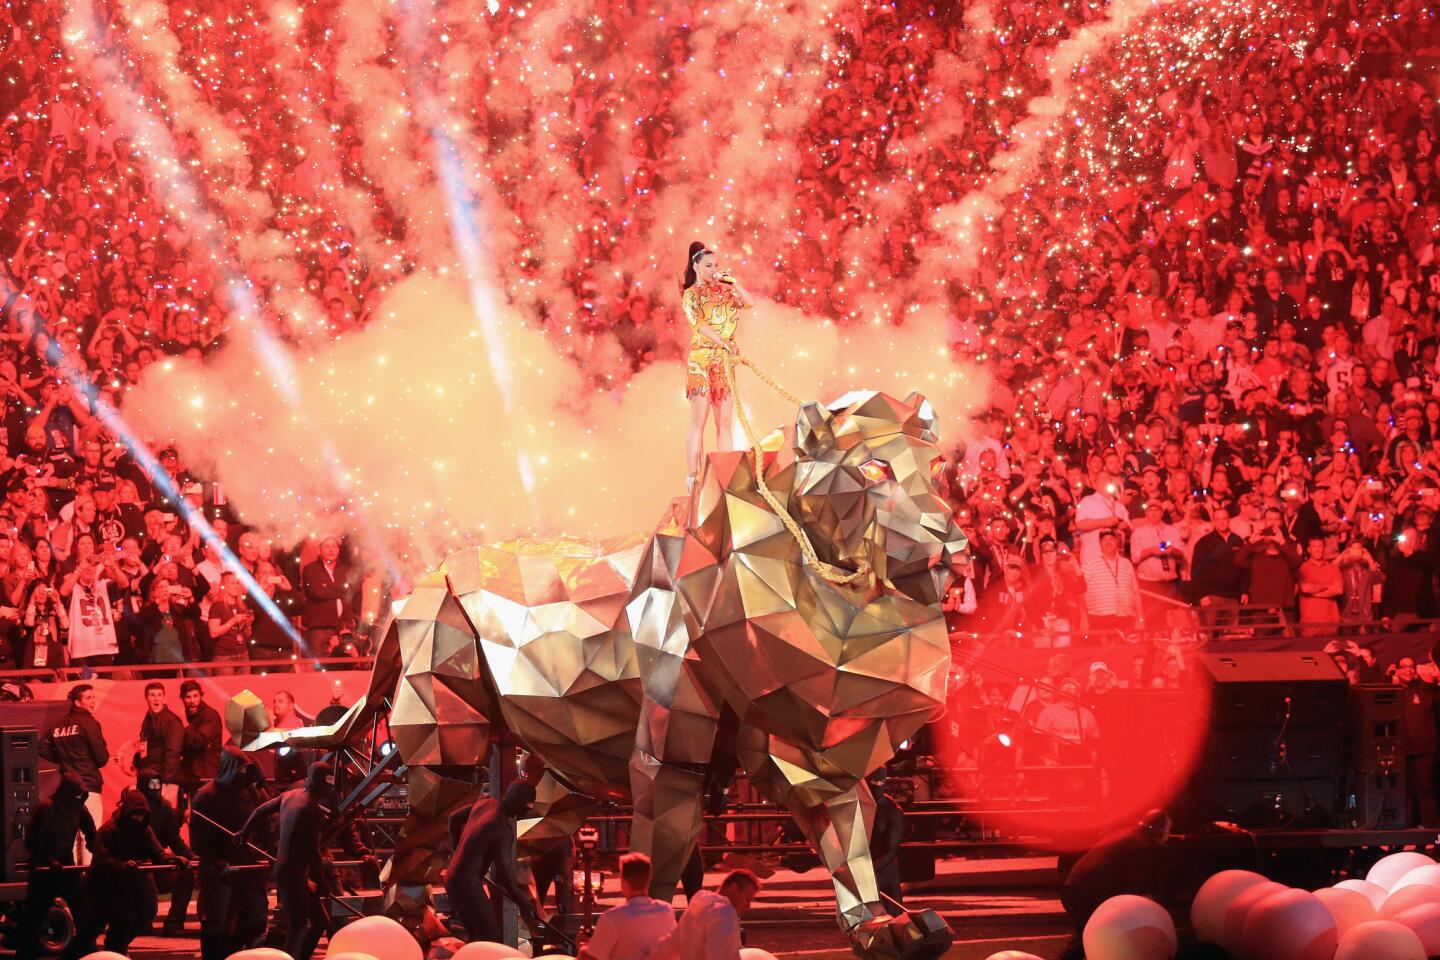 Recording artist Katy Perry enters University of Phoenix Stadium as she performs during Super Bowl XLIX halftime show in Glendale, Ariz.